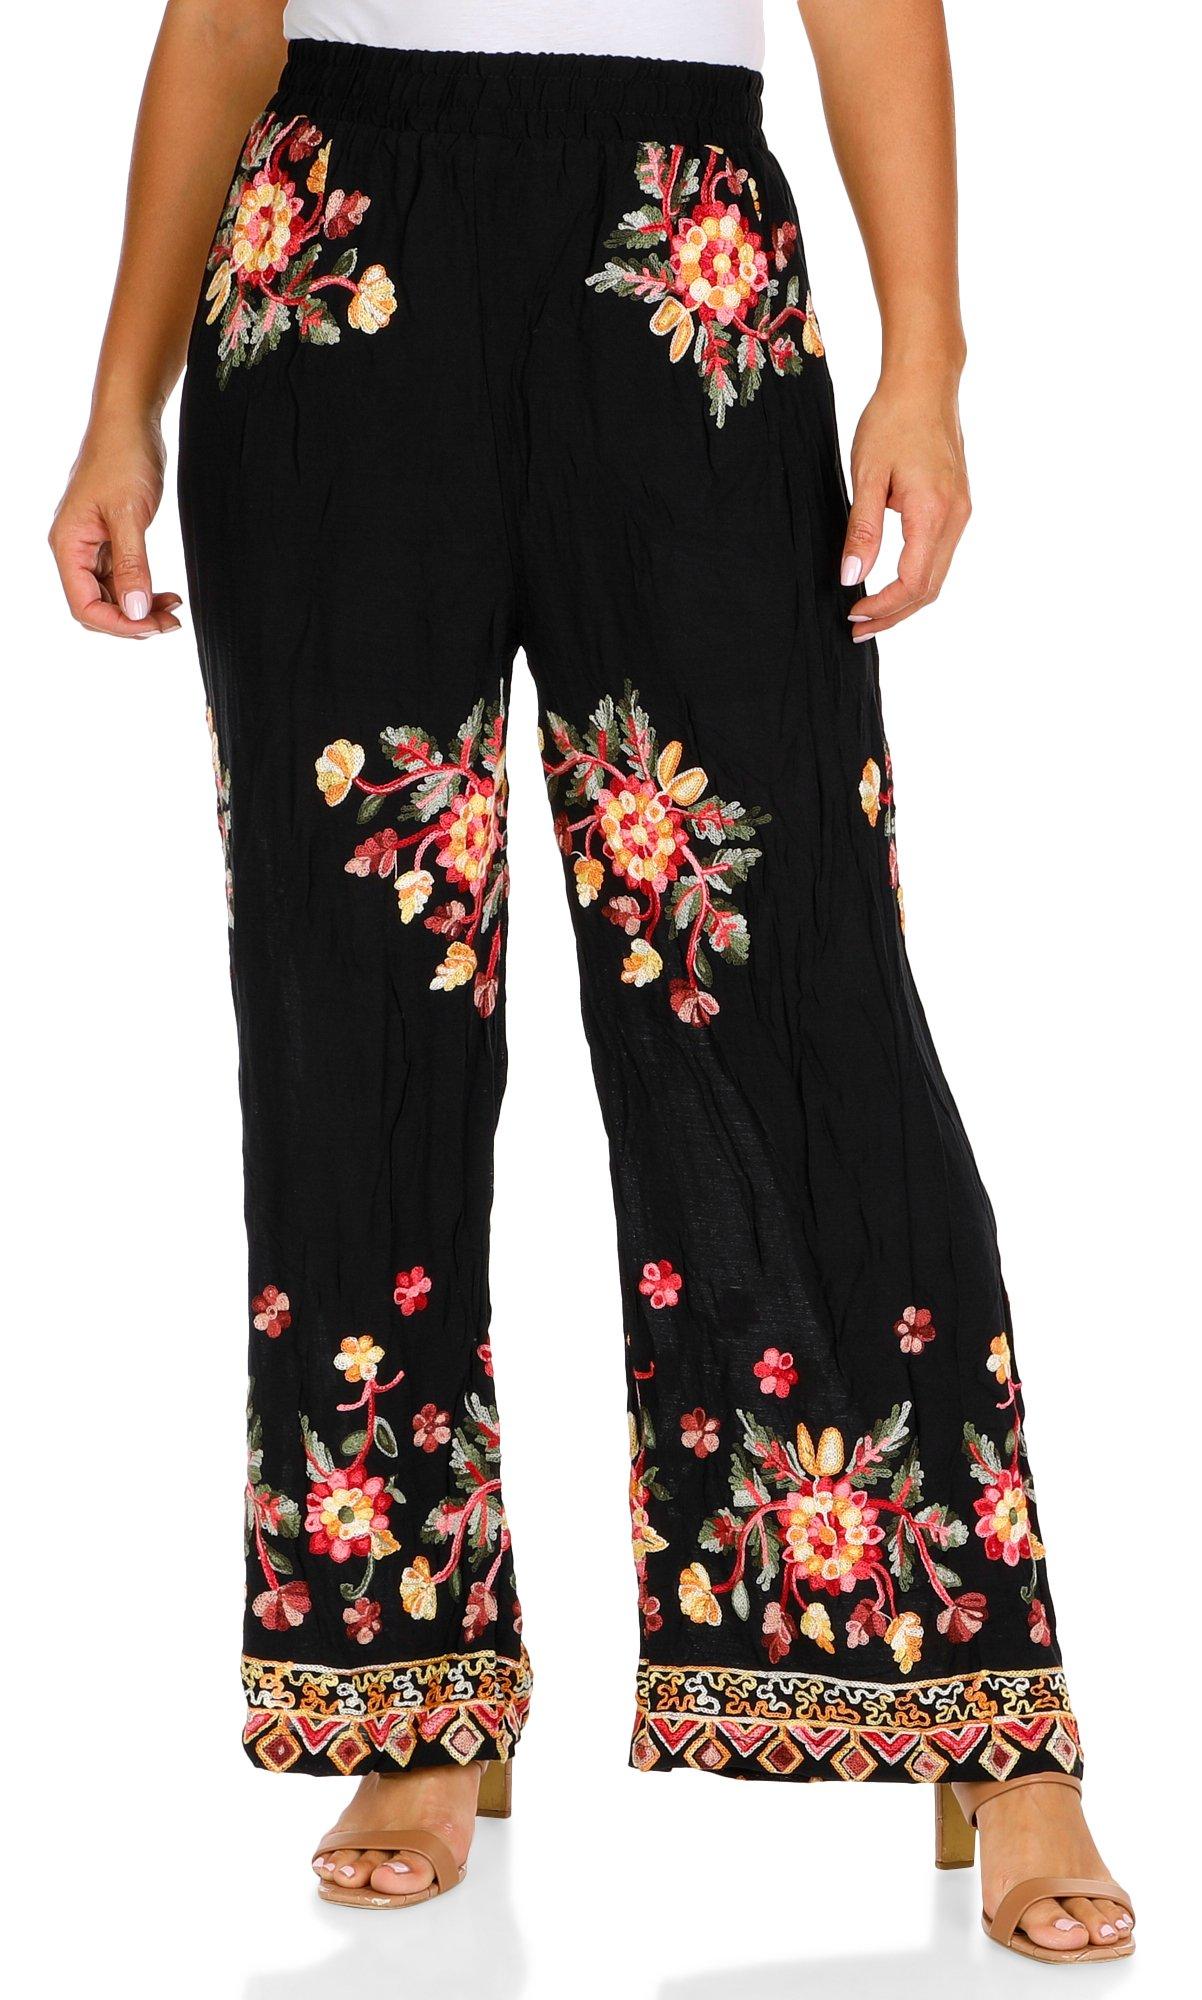 Women's Embroidered Floral Pull On Pants